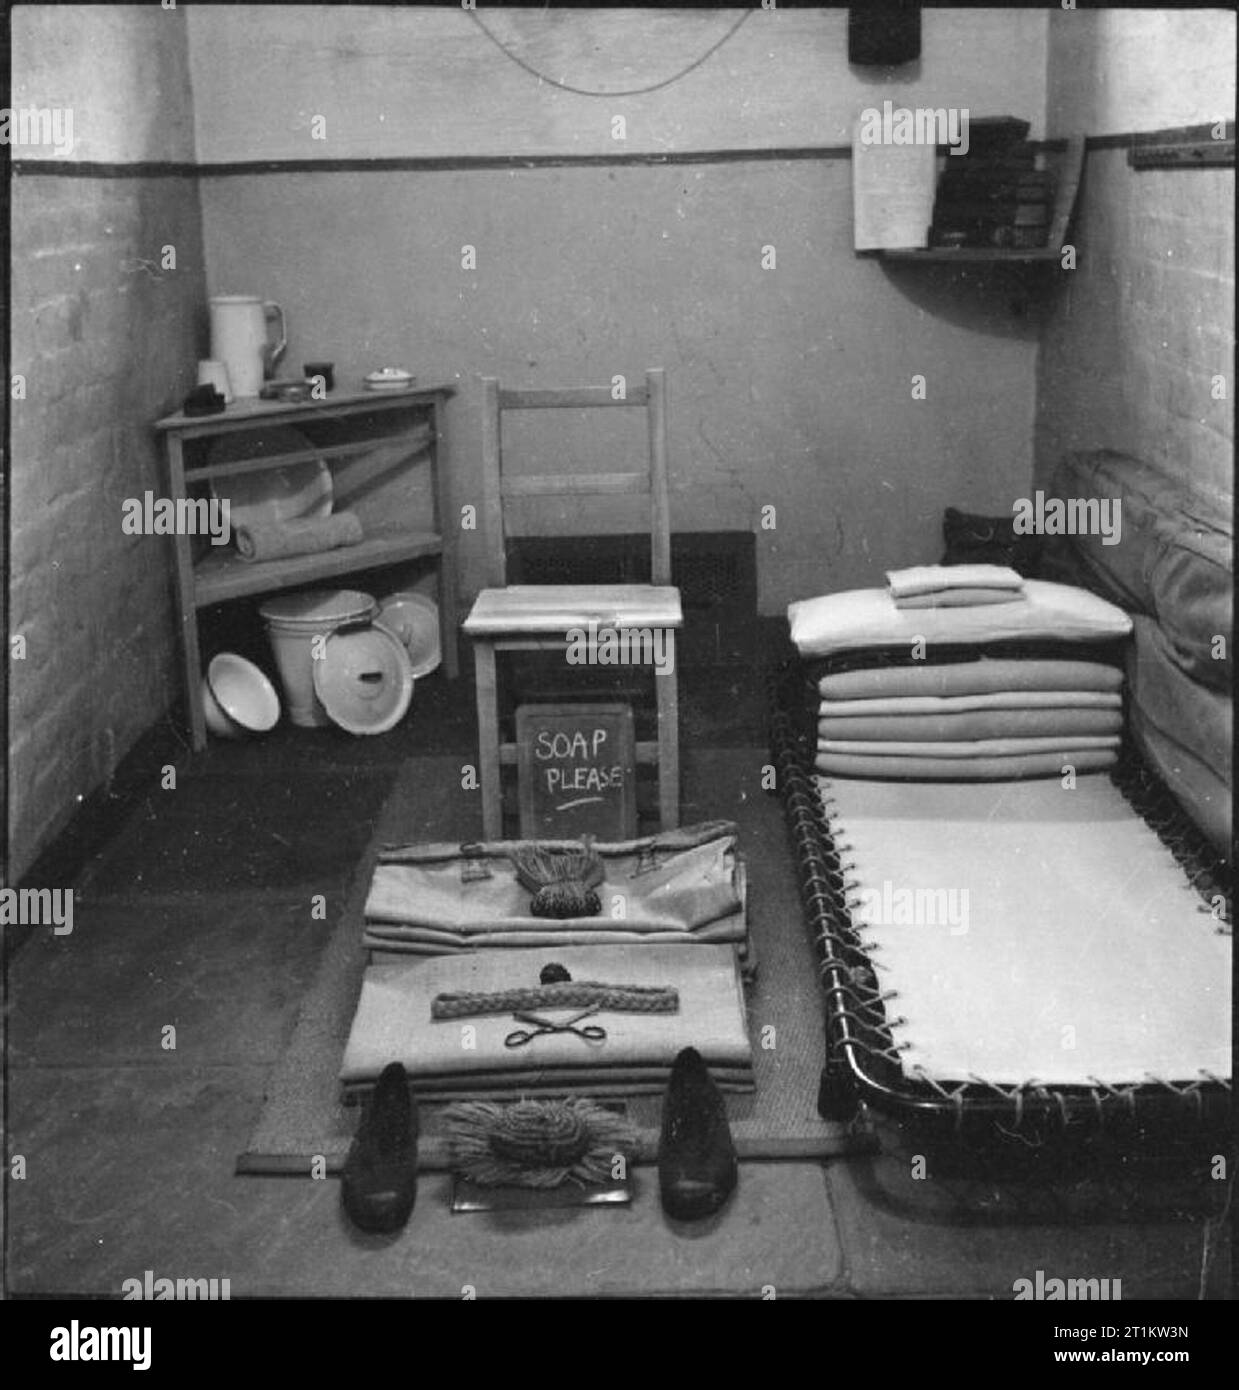 Wakefield Training Prison and Camp- Everyday Life in a British Prison, Wakefield, Yorkshire, England, 1944 A view of an inmate's room at Wakefield Prison. Clearly visible are the bed, a chair, several small shelves, and slop bucket. The rest of the inmate's belongings, such as a pair of shoes and a comb, have been set out neatly, ready for inspection. Chalked on a small blackboard are the words 'soap please'. Stock Photo